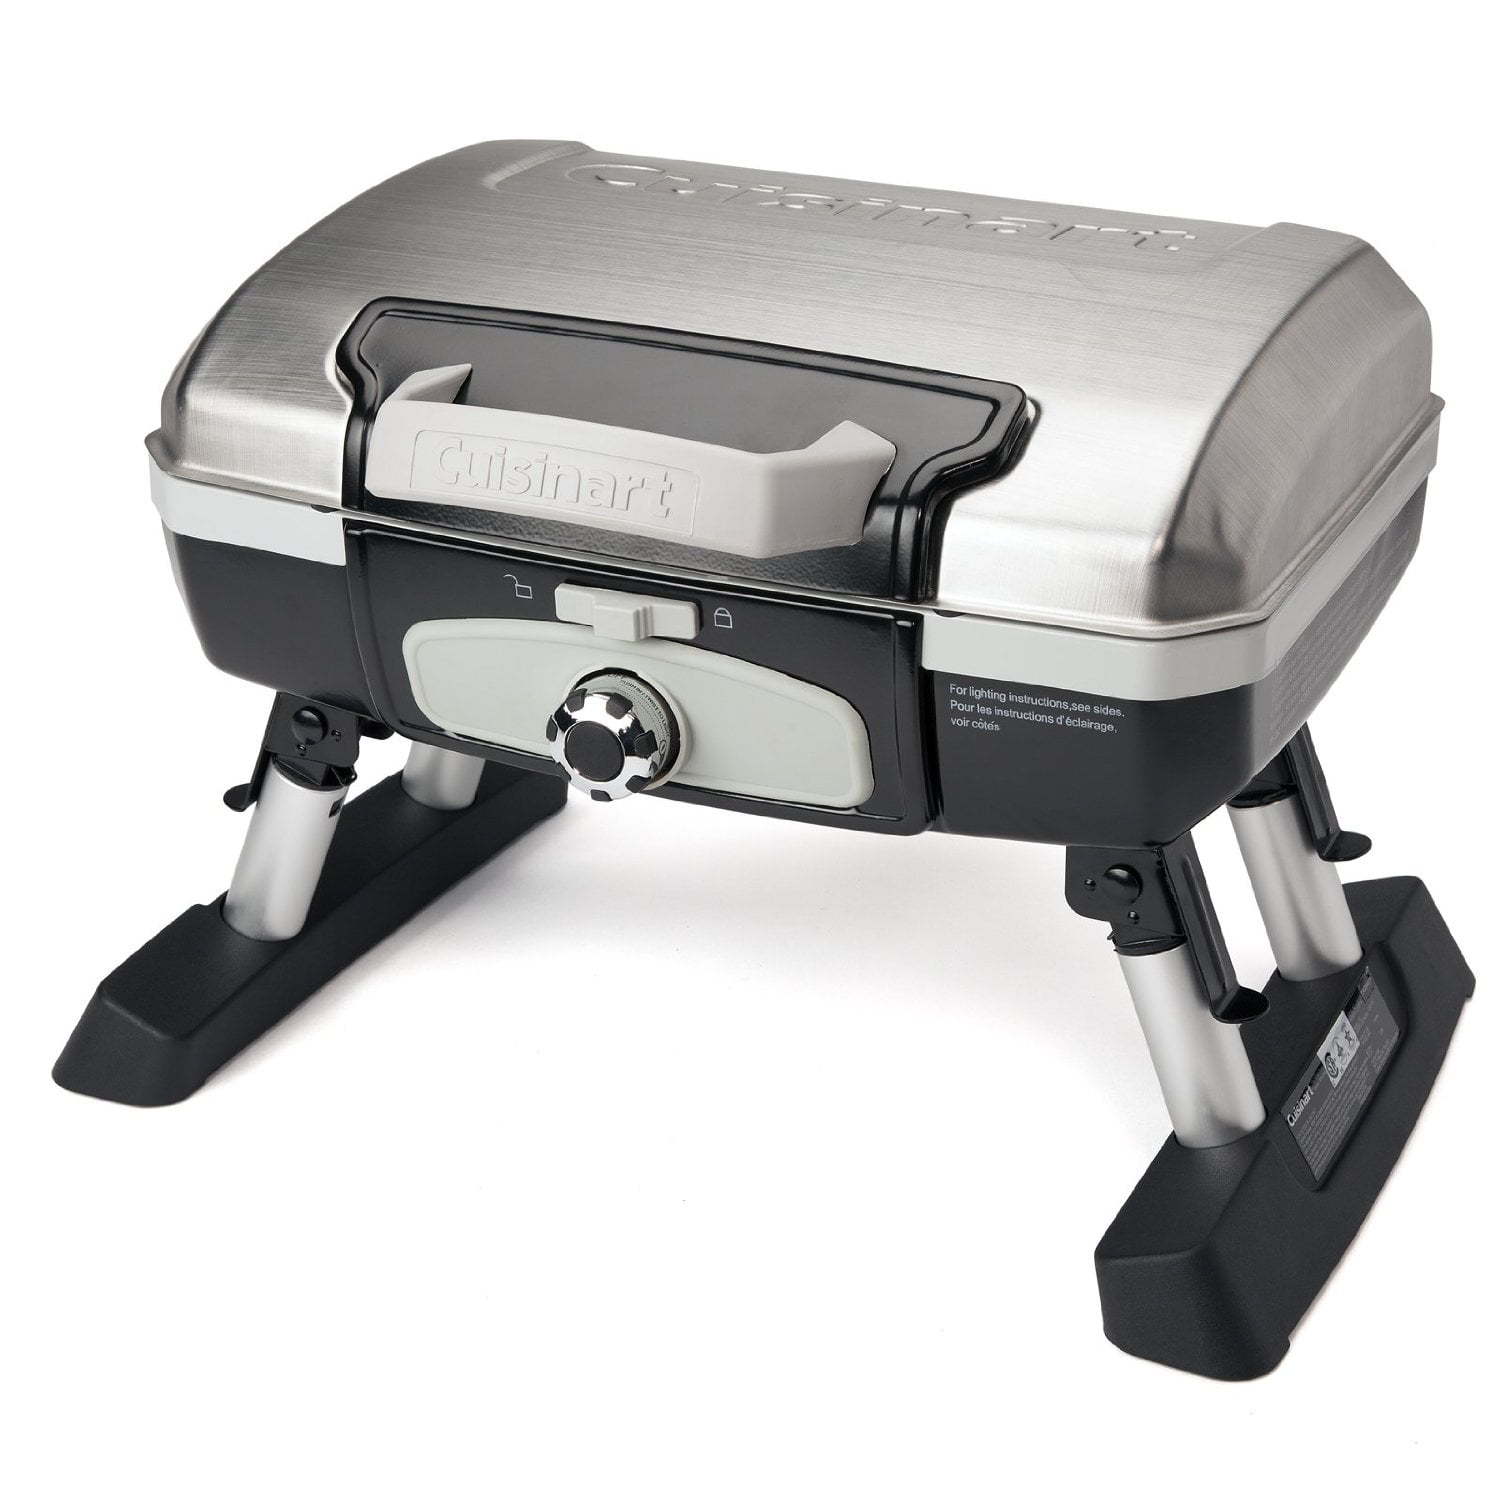 Cuisinart Portable Stainless Steel Propane Grill - 146 Sq In Cooking  Surface, 8000 BTU Burner, Compact Design - Ideal for Camping, Tailgating,  and More at